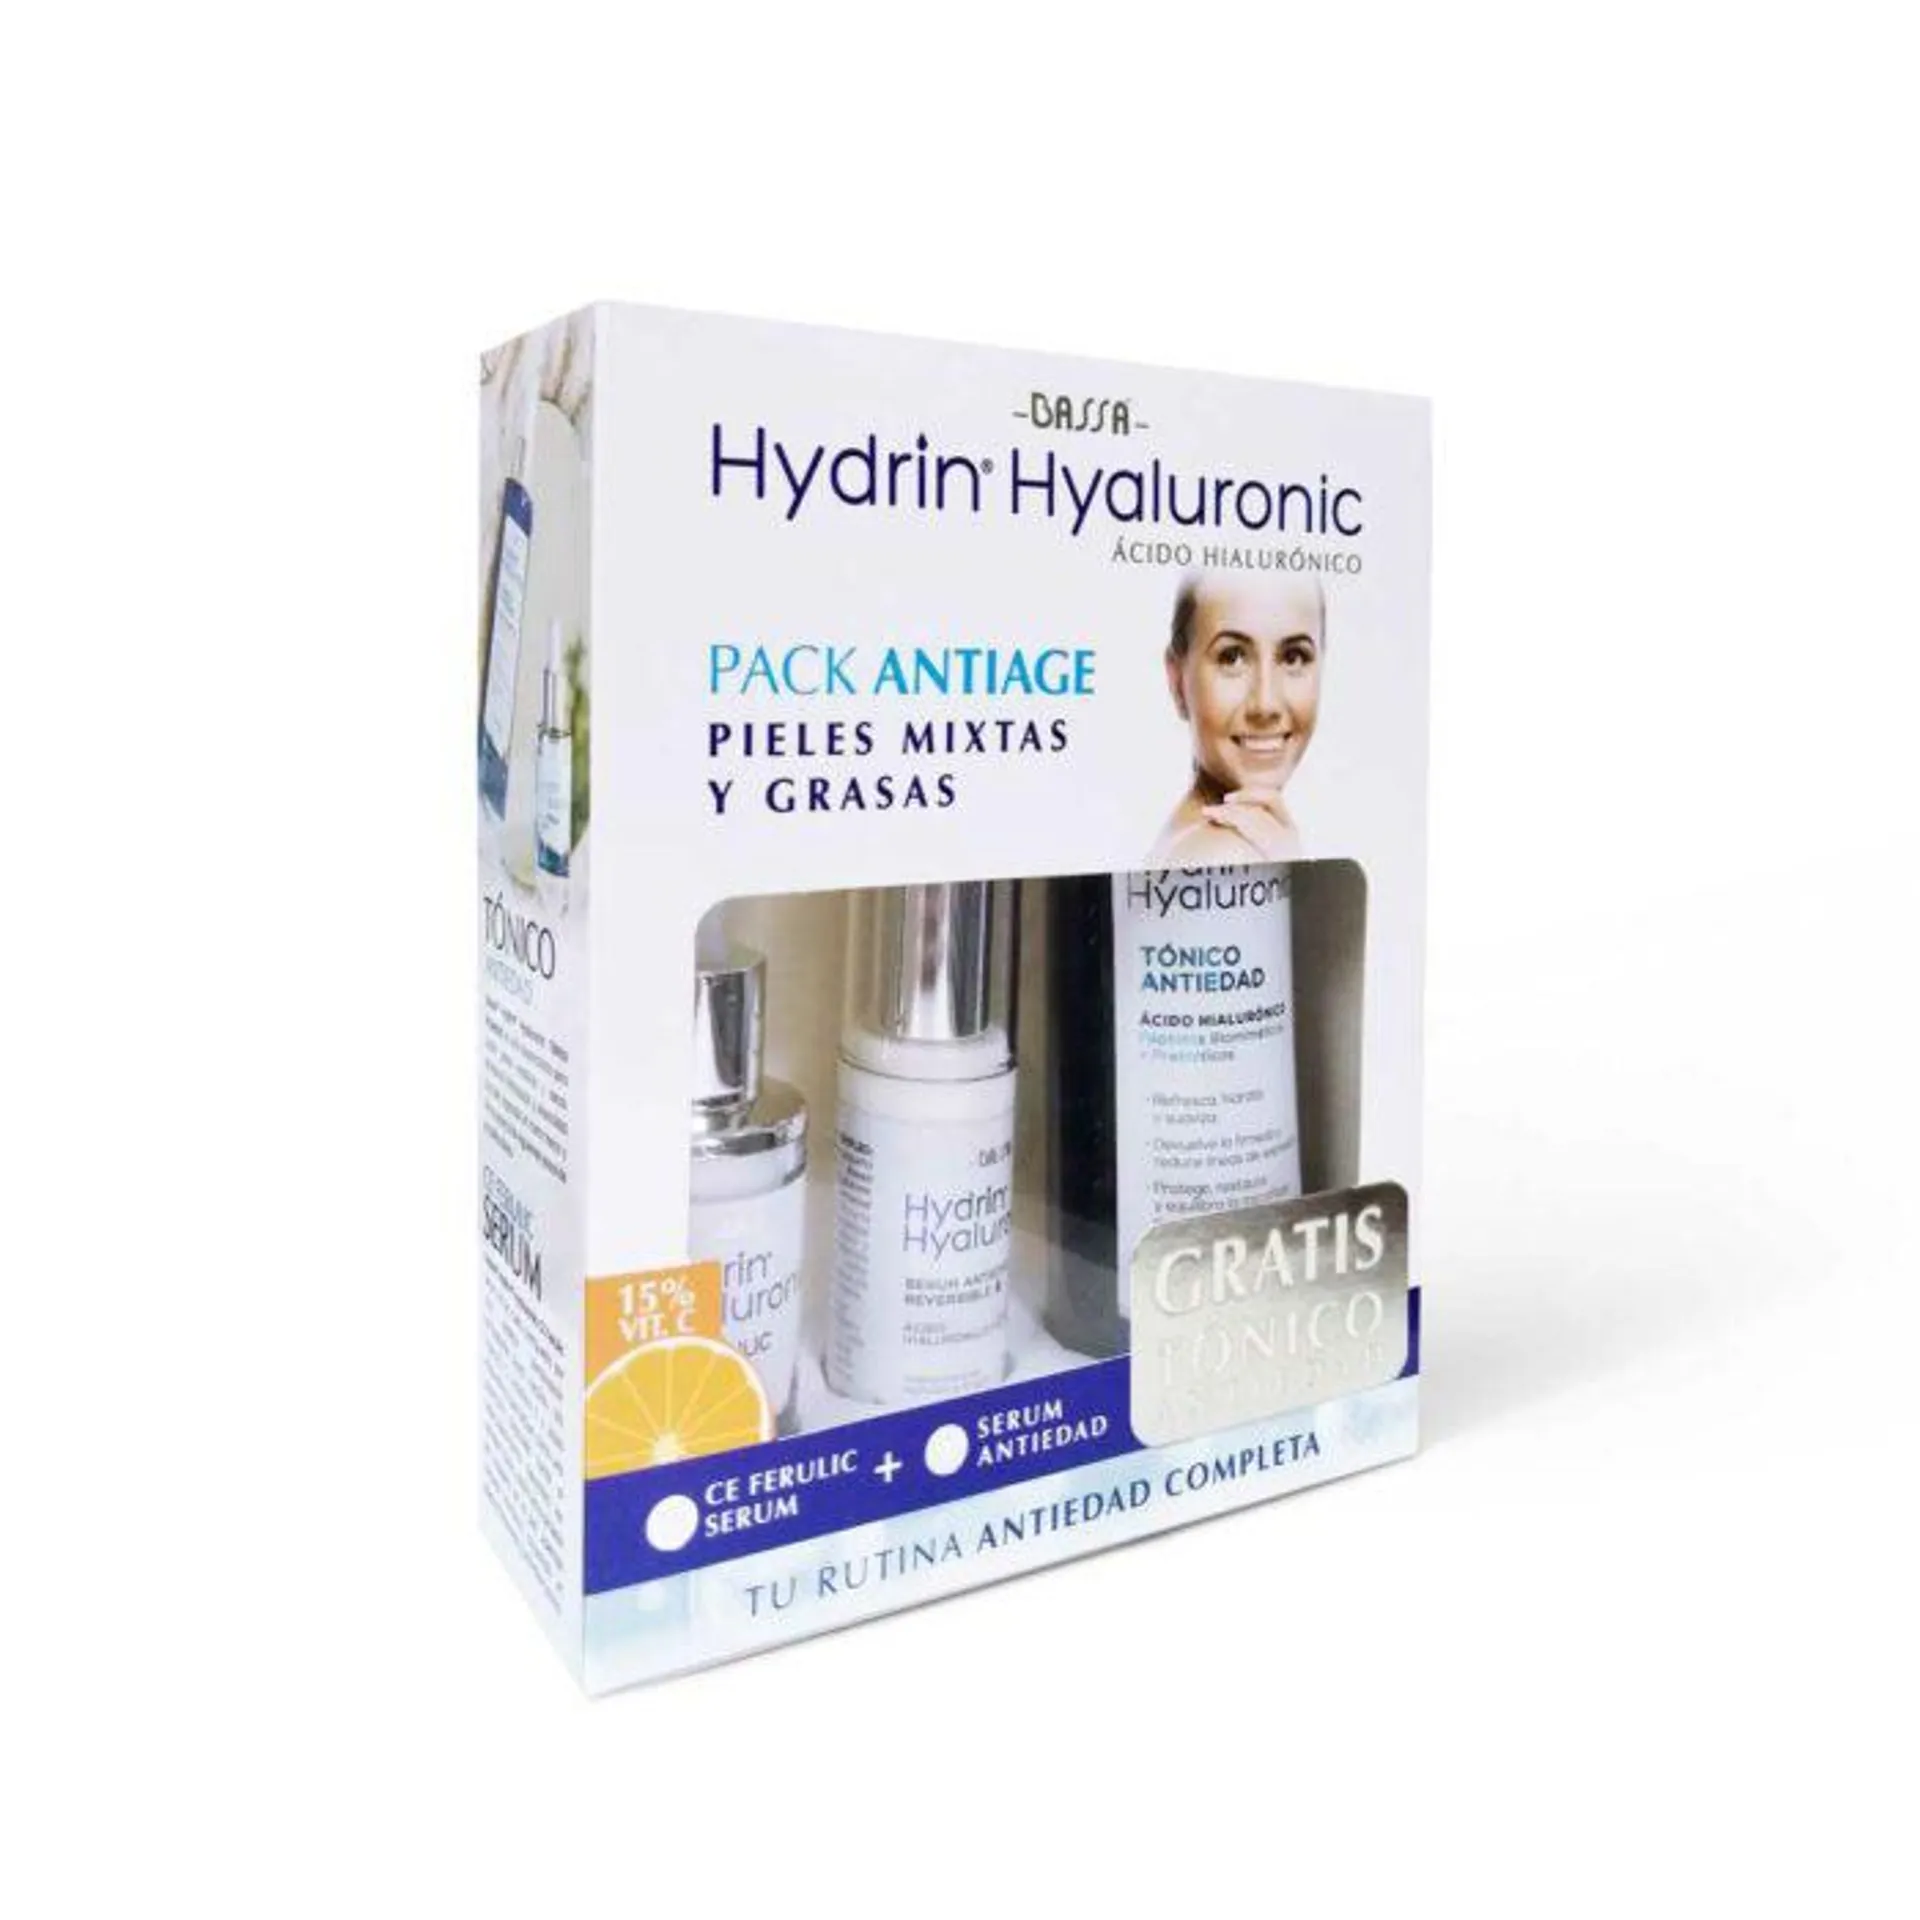 Hydrin Hyaluronic Pack Antiage Pieles Mixtas y Grasas